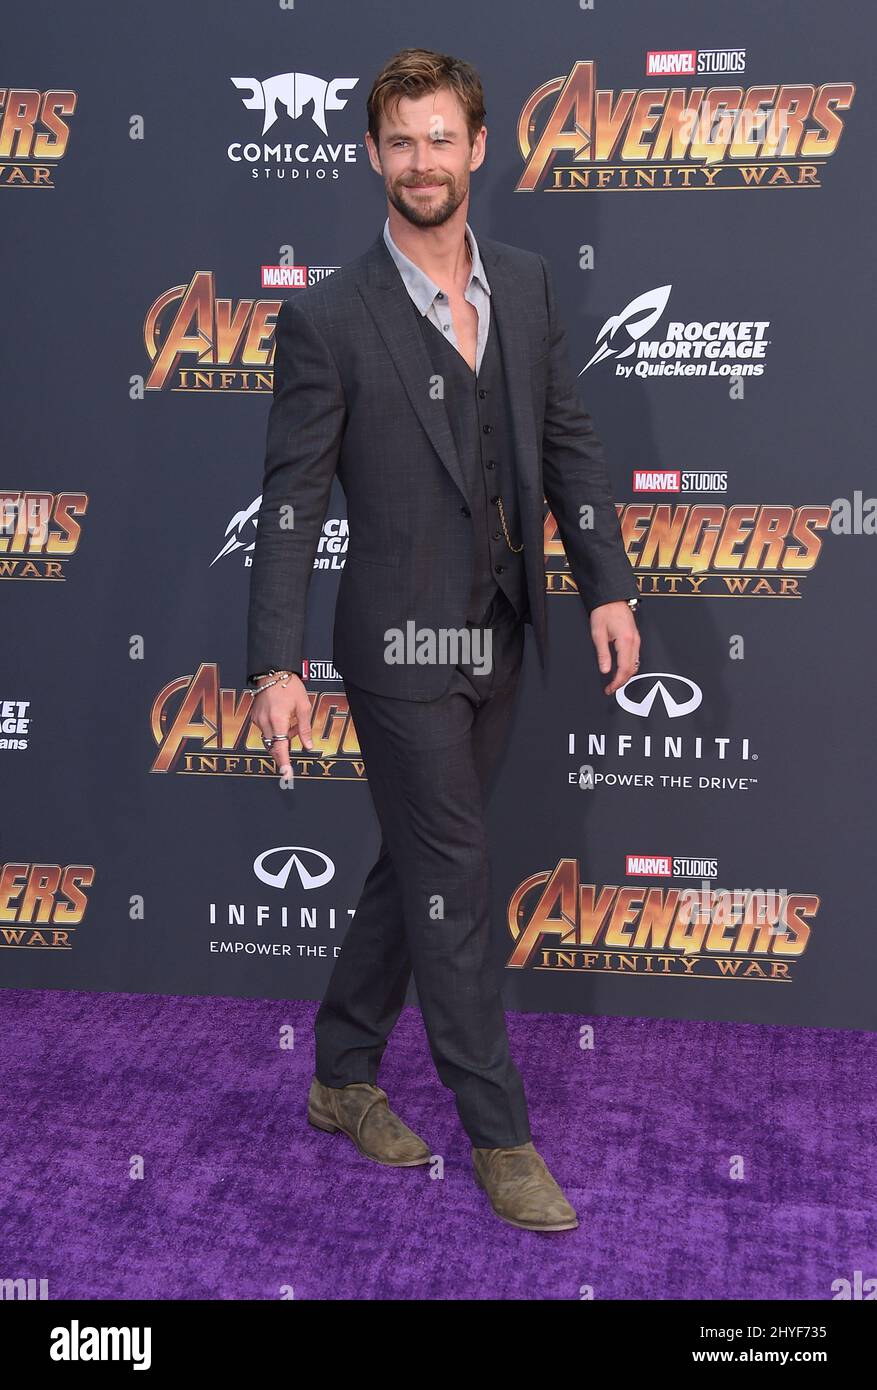 Chris Hemsworth attending the world premiere of Avengers: Infinity War, held at the El Capitan Theatre in Hollywood, California Stock Photo